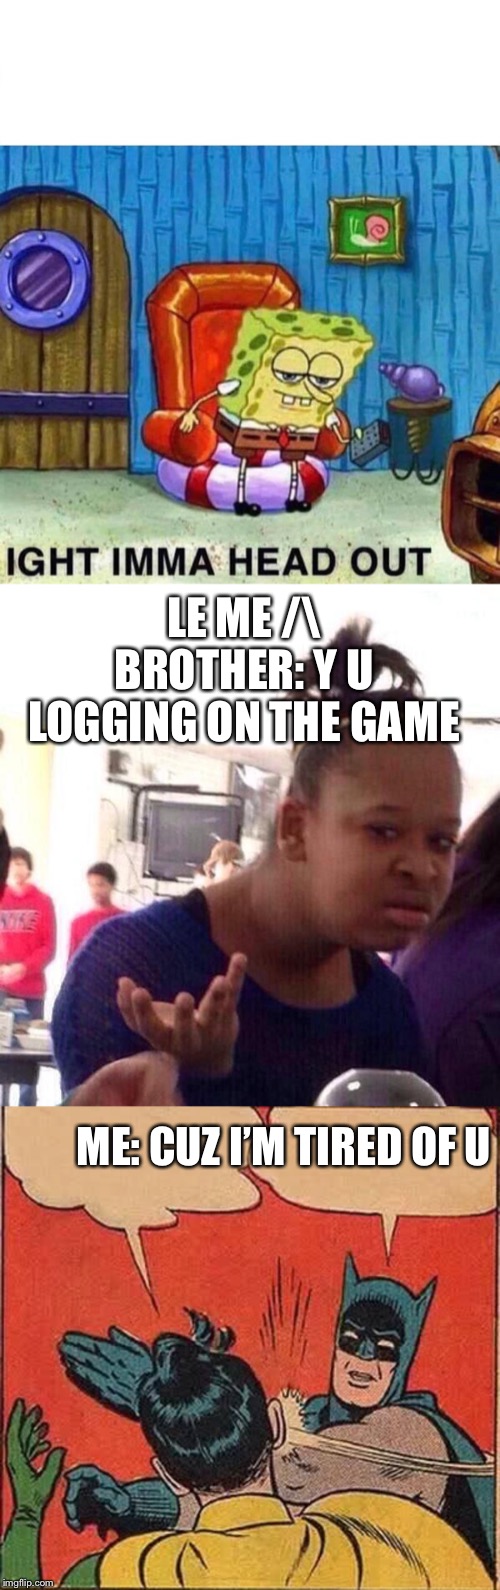 LE ME /\
BROTHER: Y U LOGGING ON THE GAME; ME: CUZ I’M TIRED OF U | image tagged in memes,batman slapping robin,black girl wat,spongebob ight imma head out | made w/ Imgflip meme maker